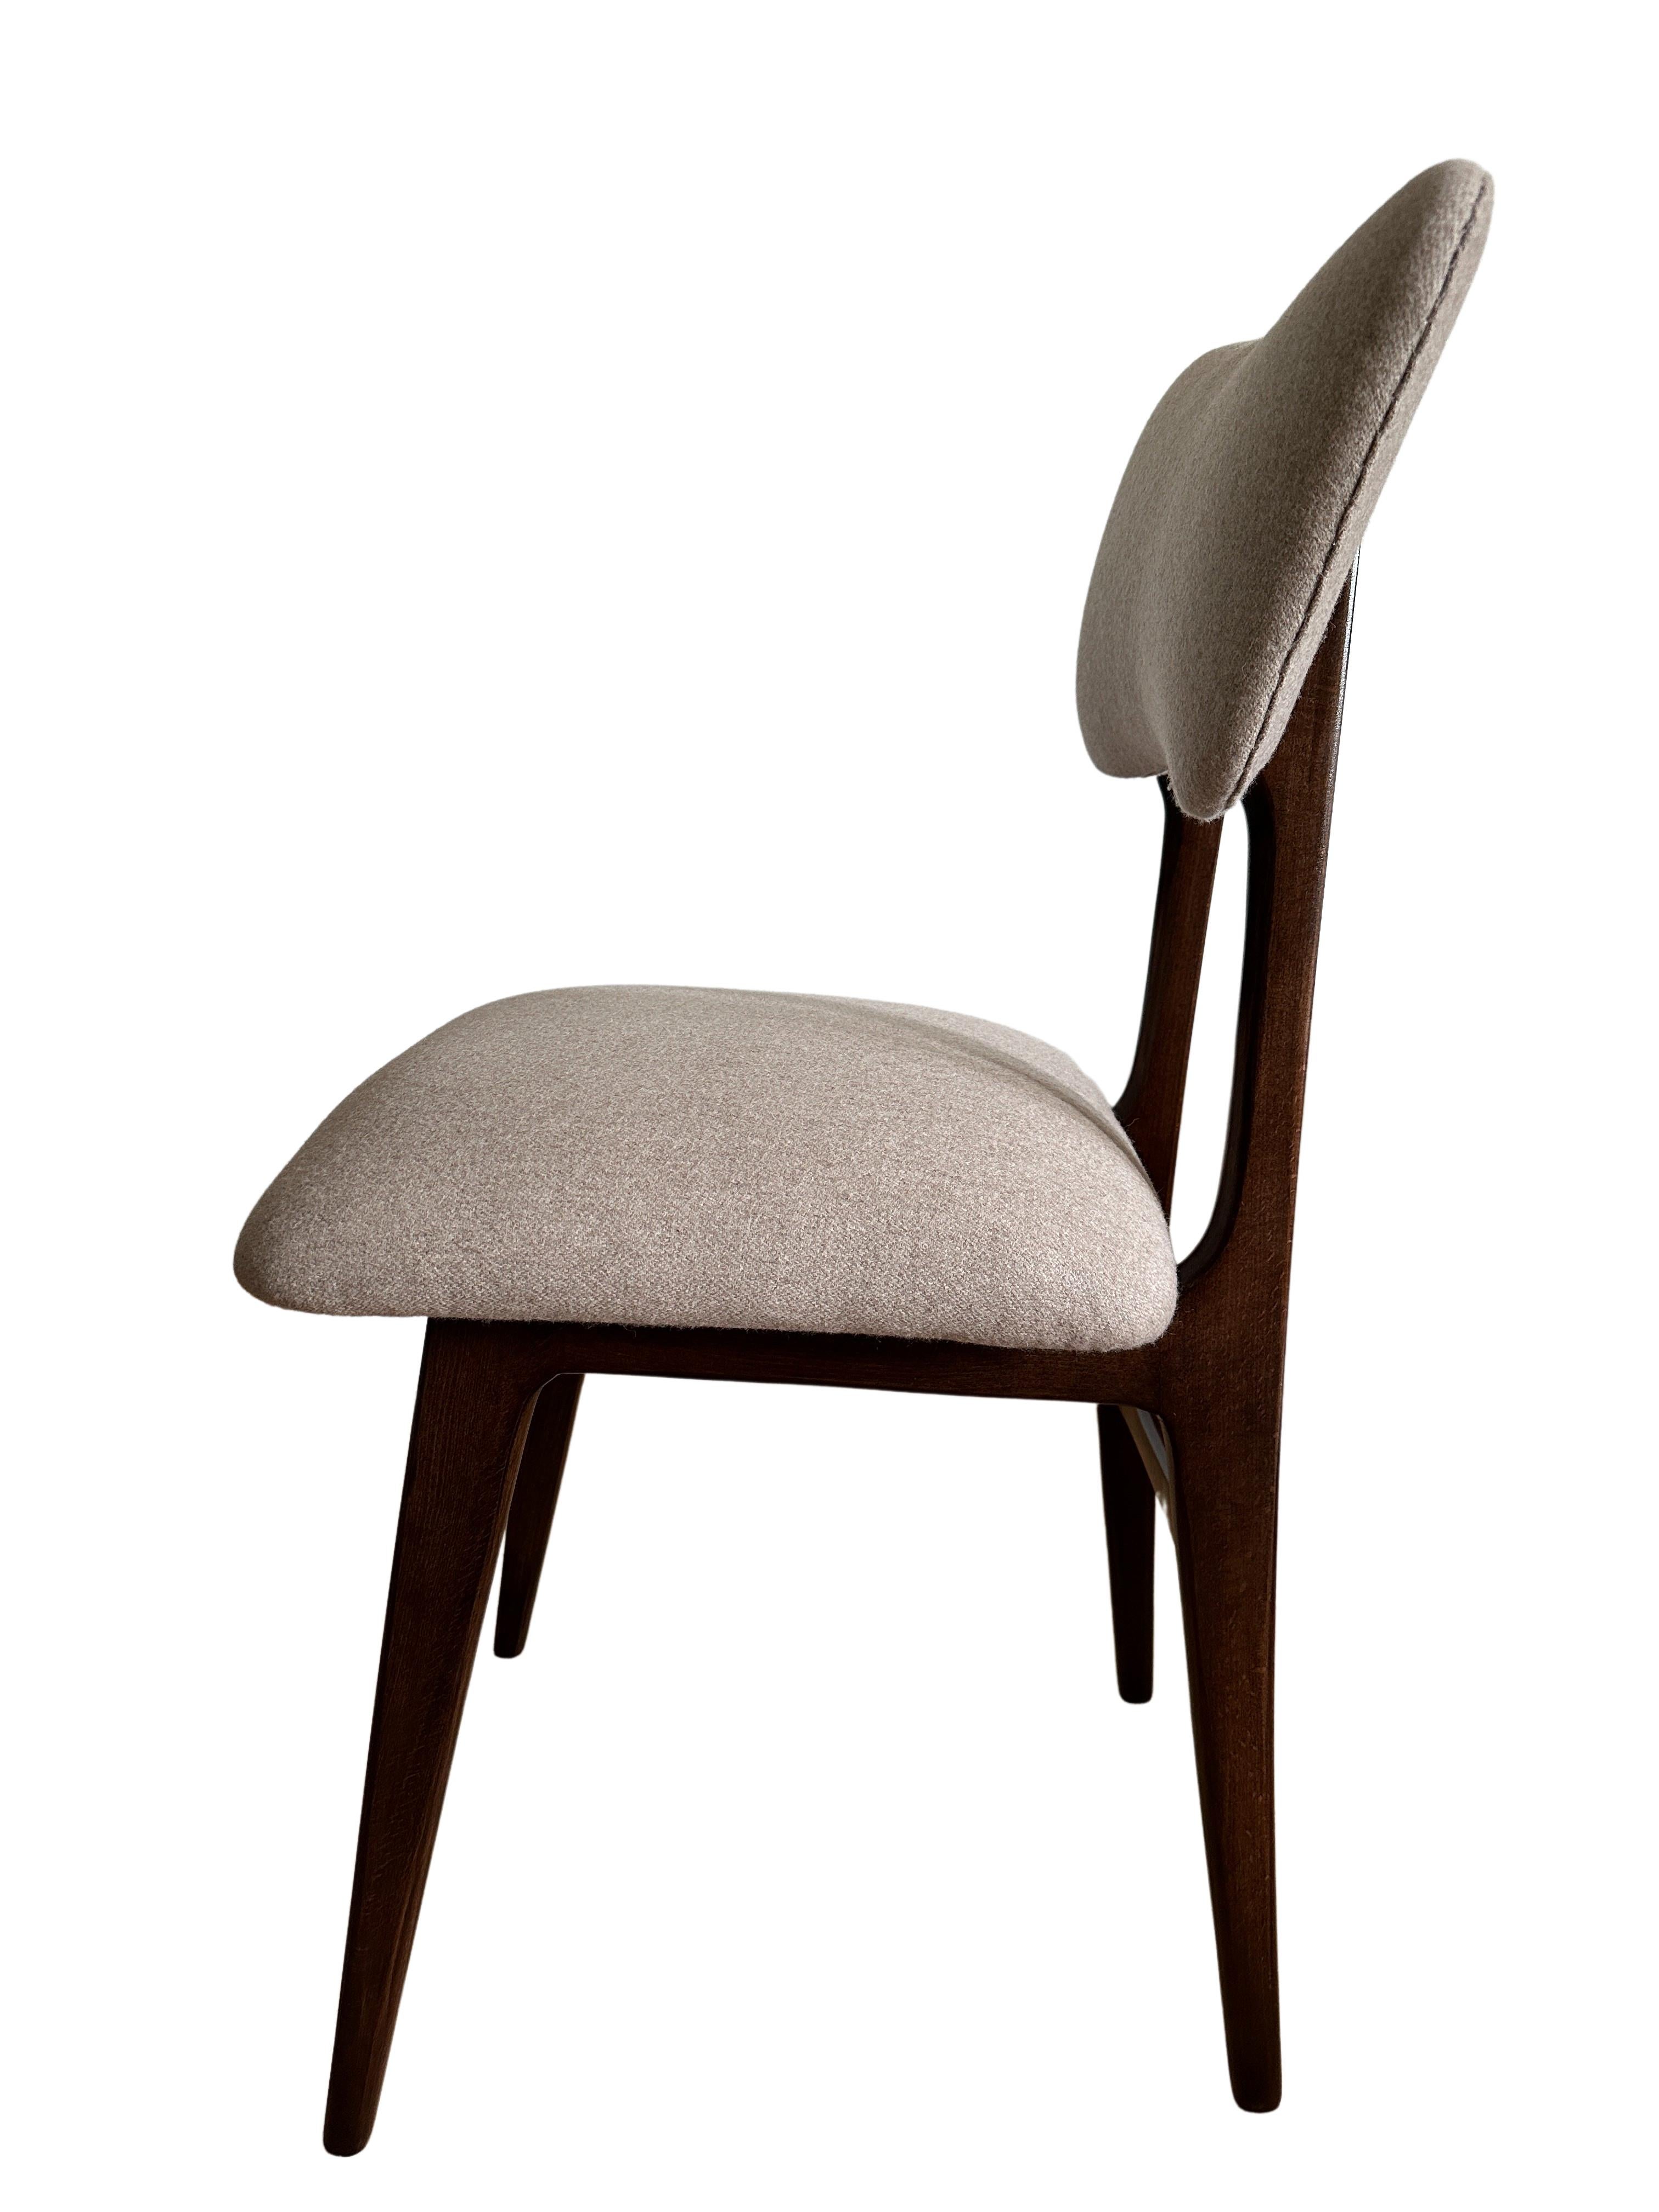 Midcentury Dining Chair in Beige Wool Upholstery, Poland, 1960s In Excellent Condition For Sale In WARSZAWA, 14